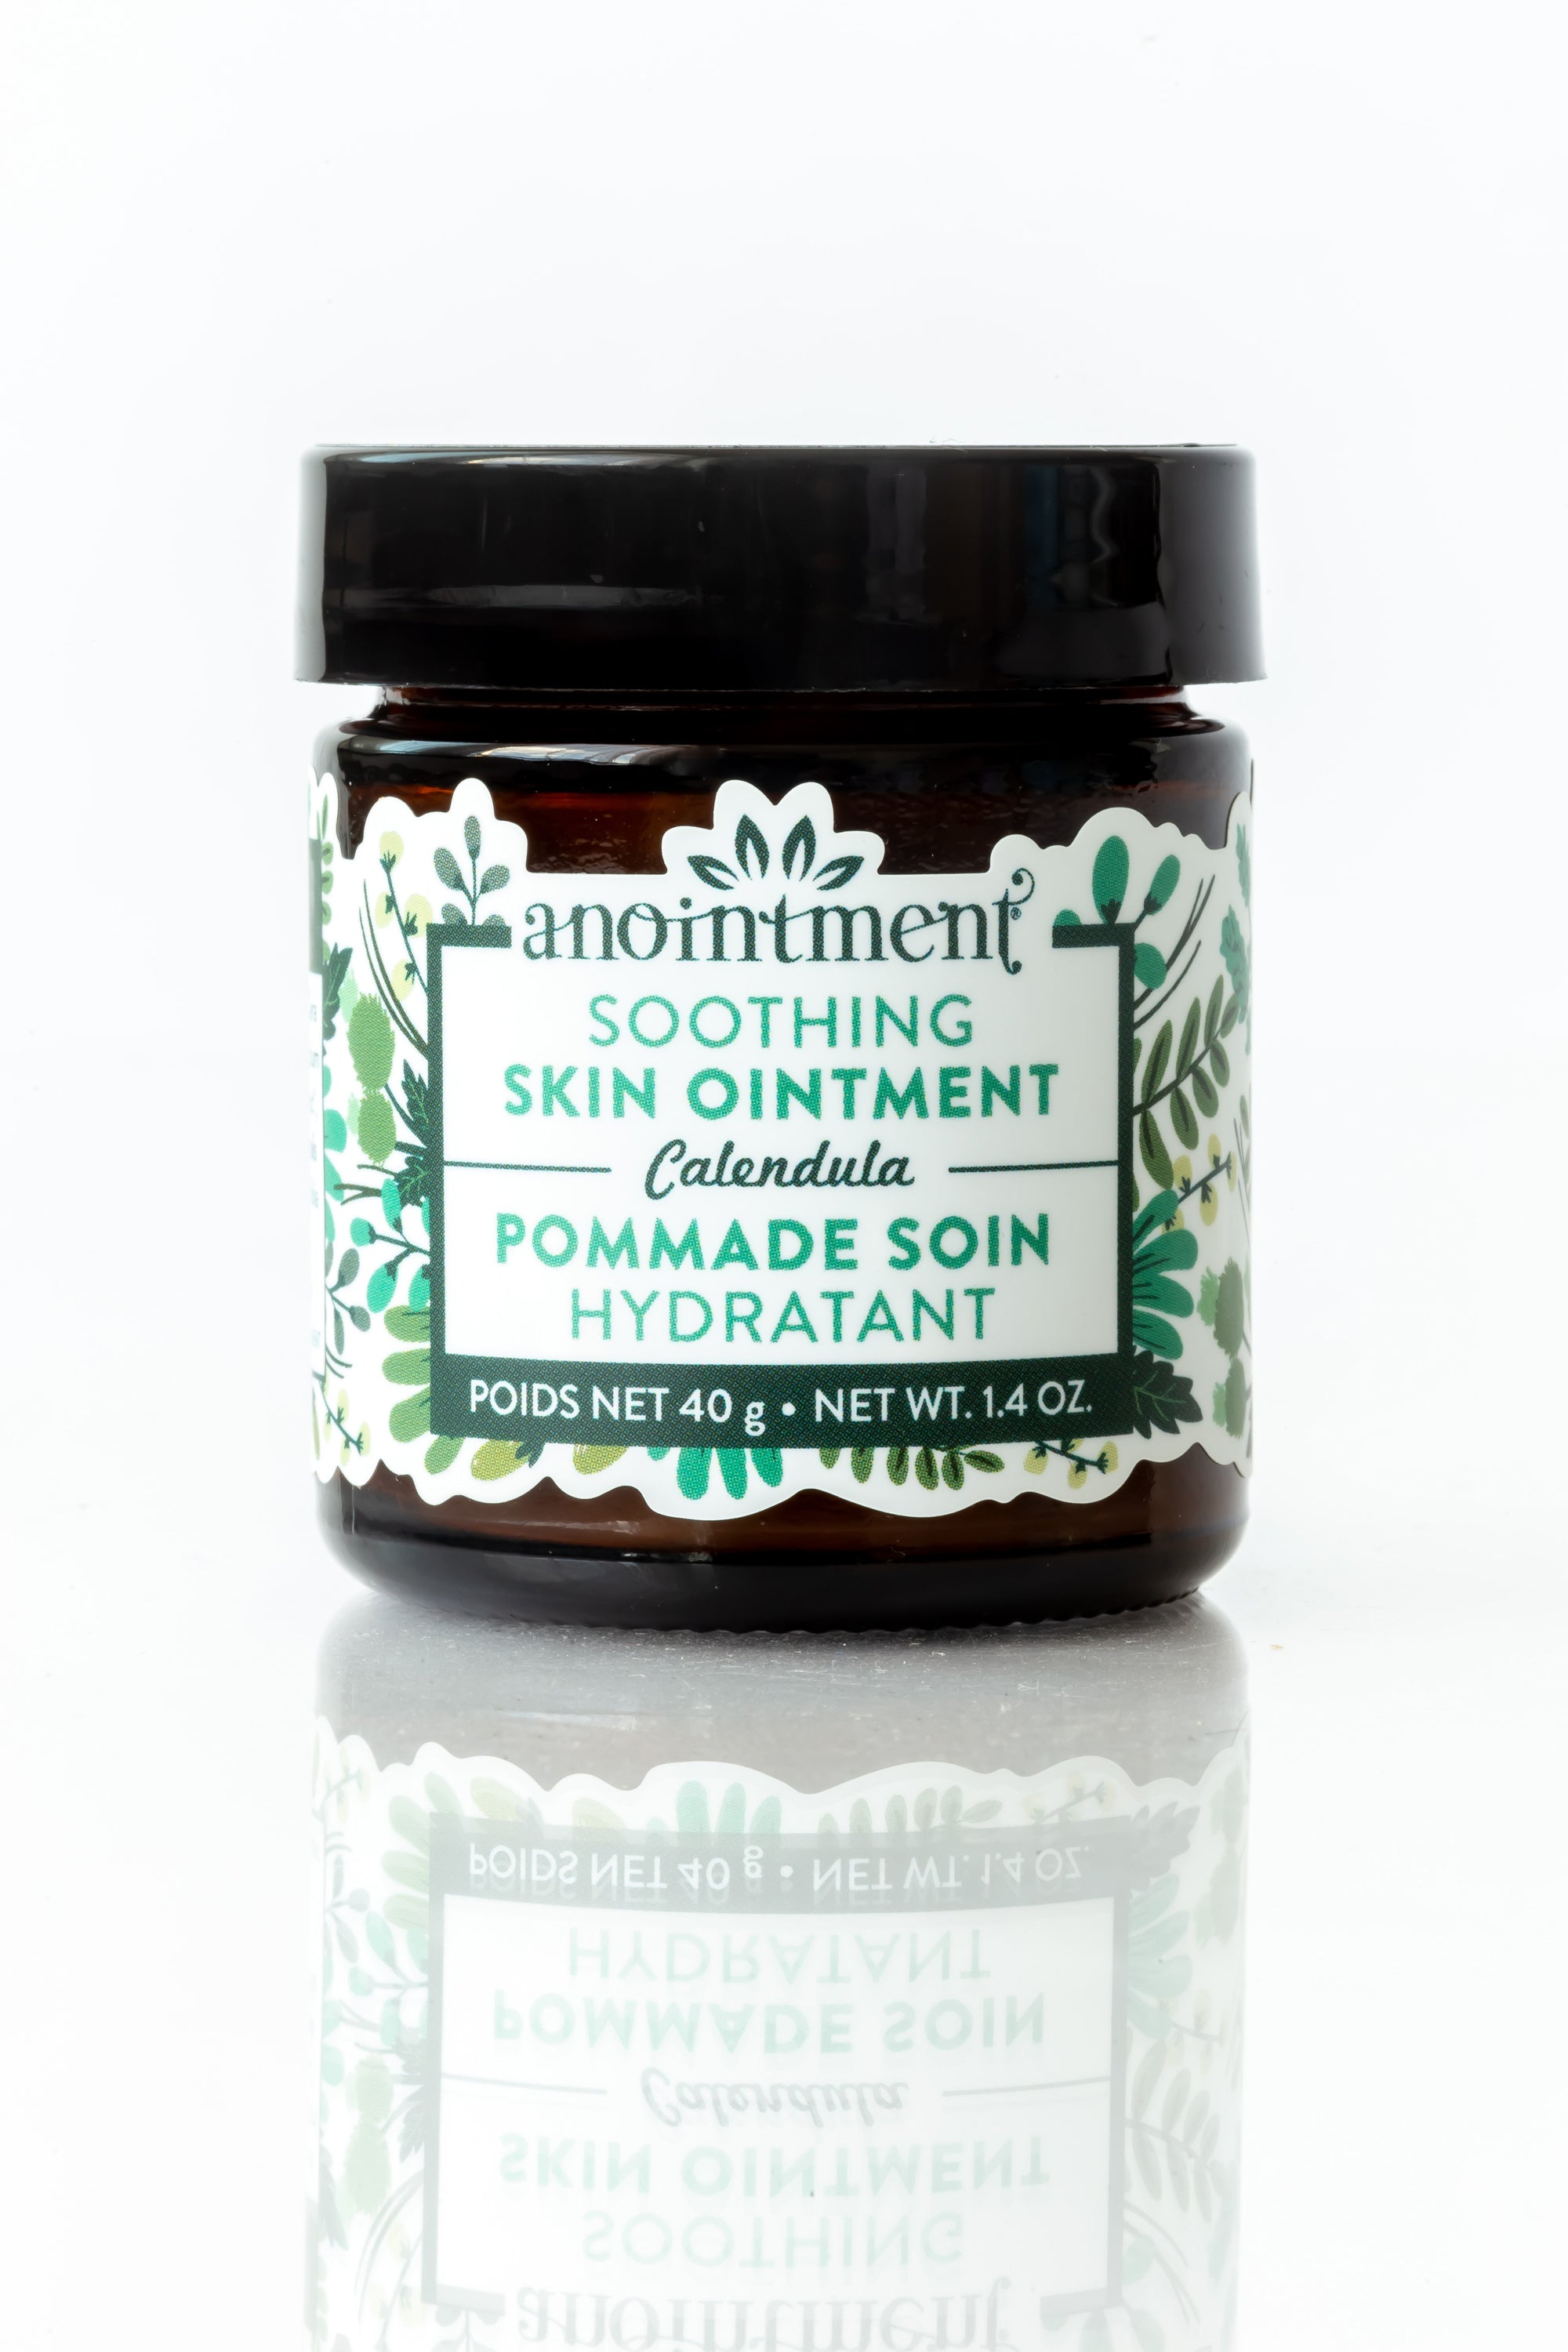 Anointment - Soothing Skin Ointment